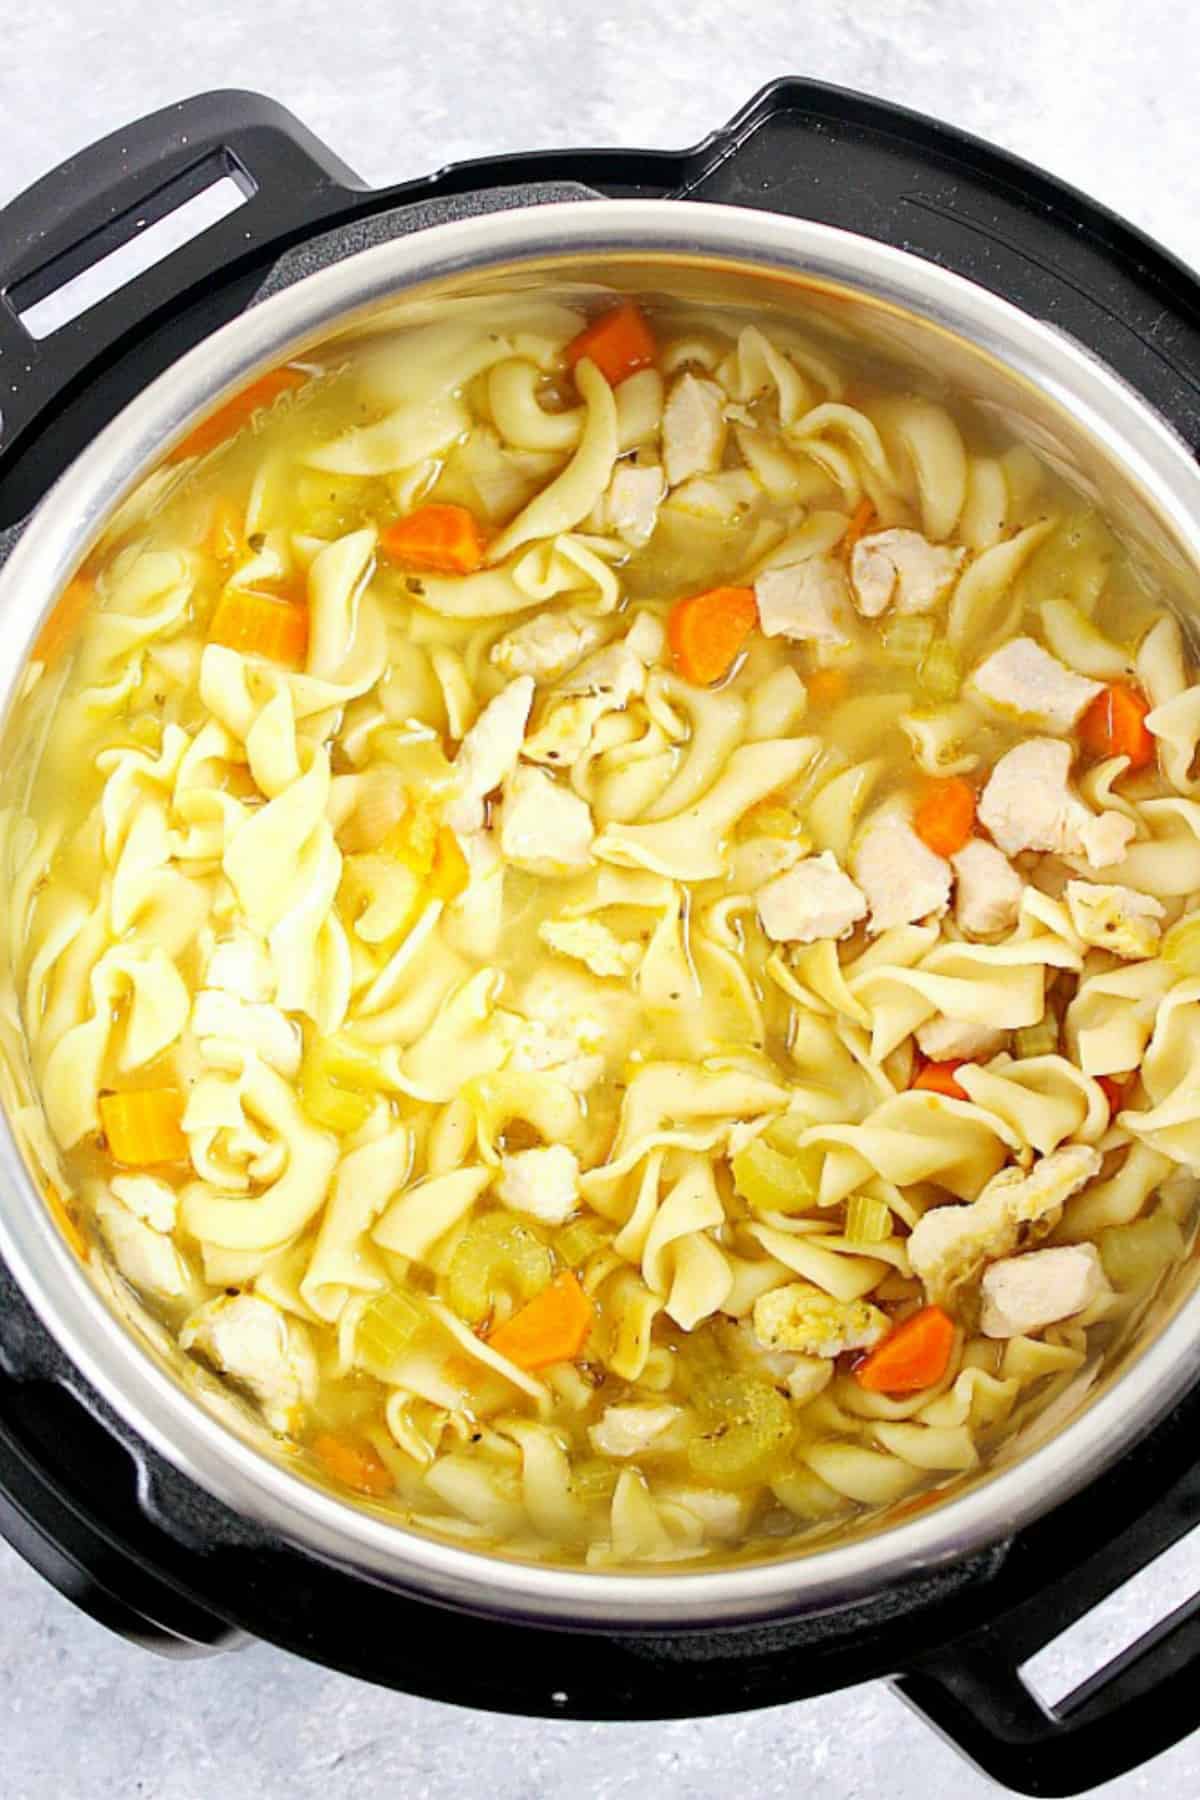 Chicken noodle soup in the pressure cooker.